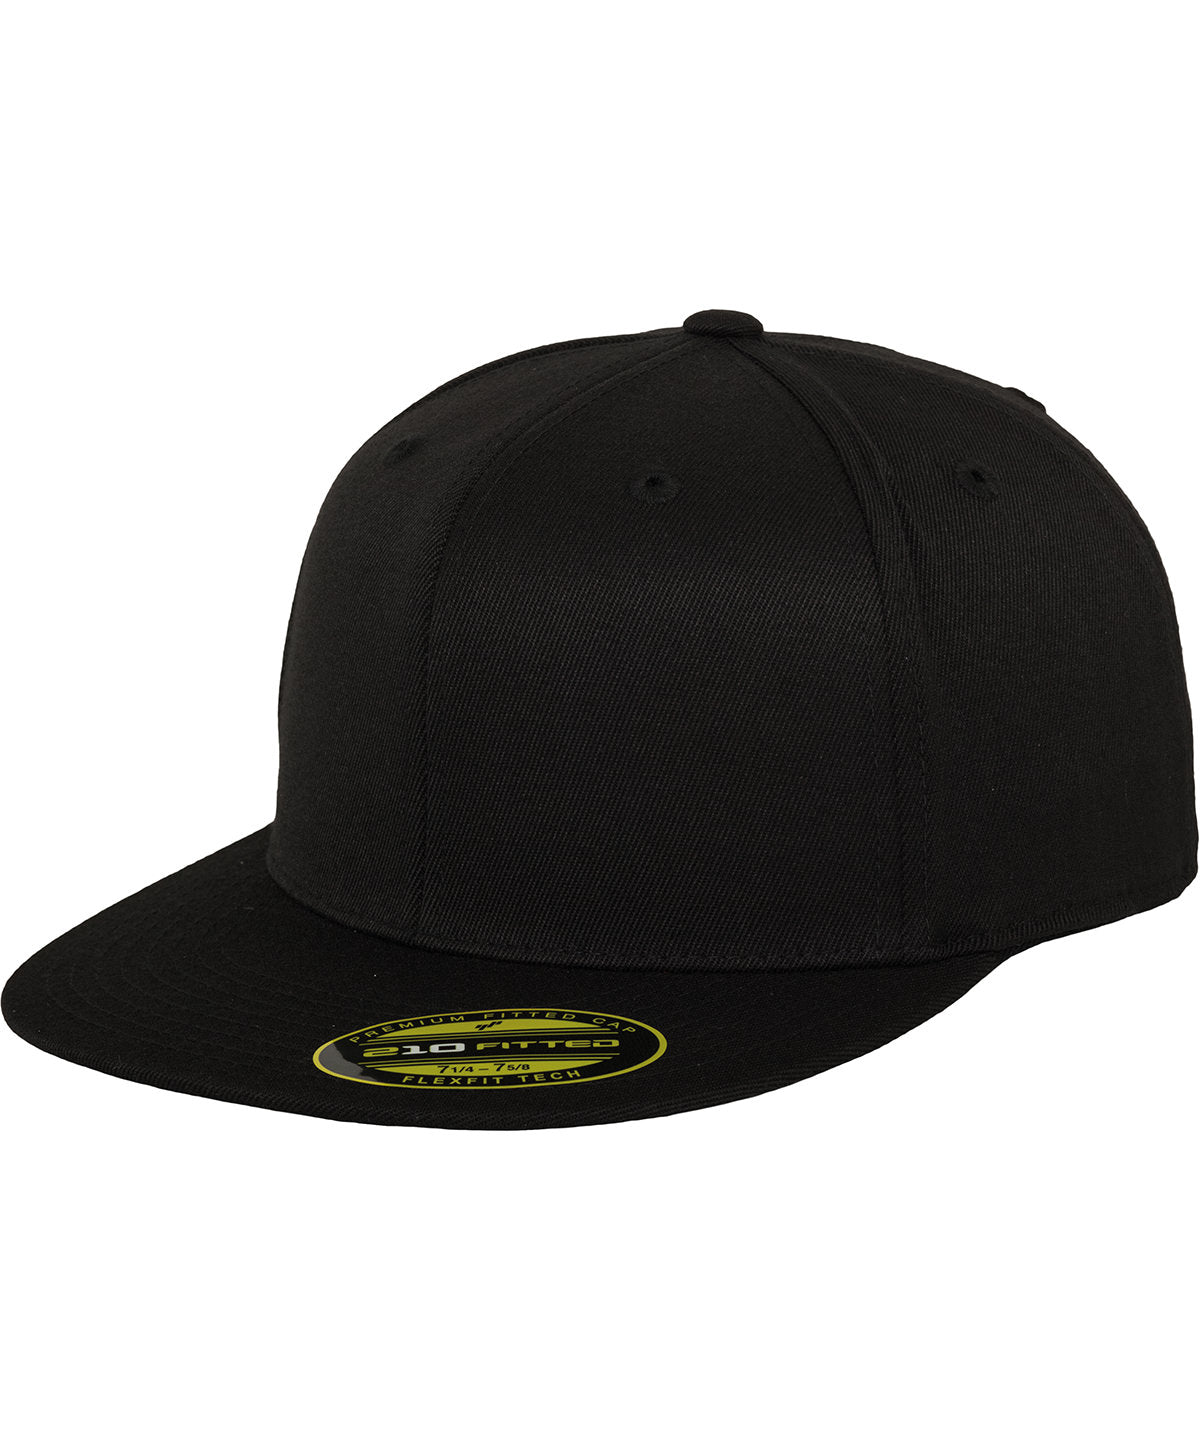 Flexfit by Yupoong Premium 210 fitted cap